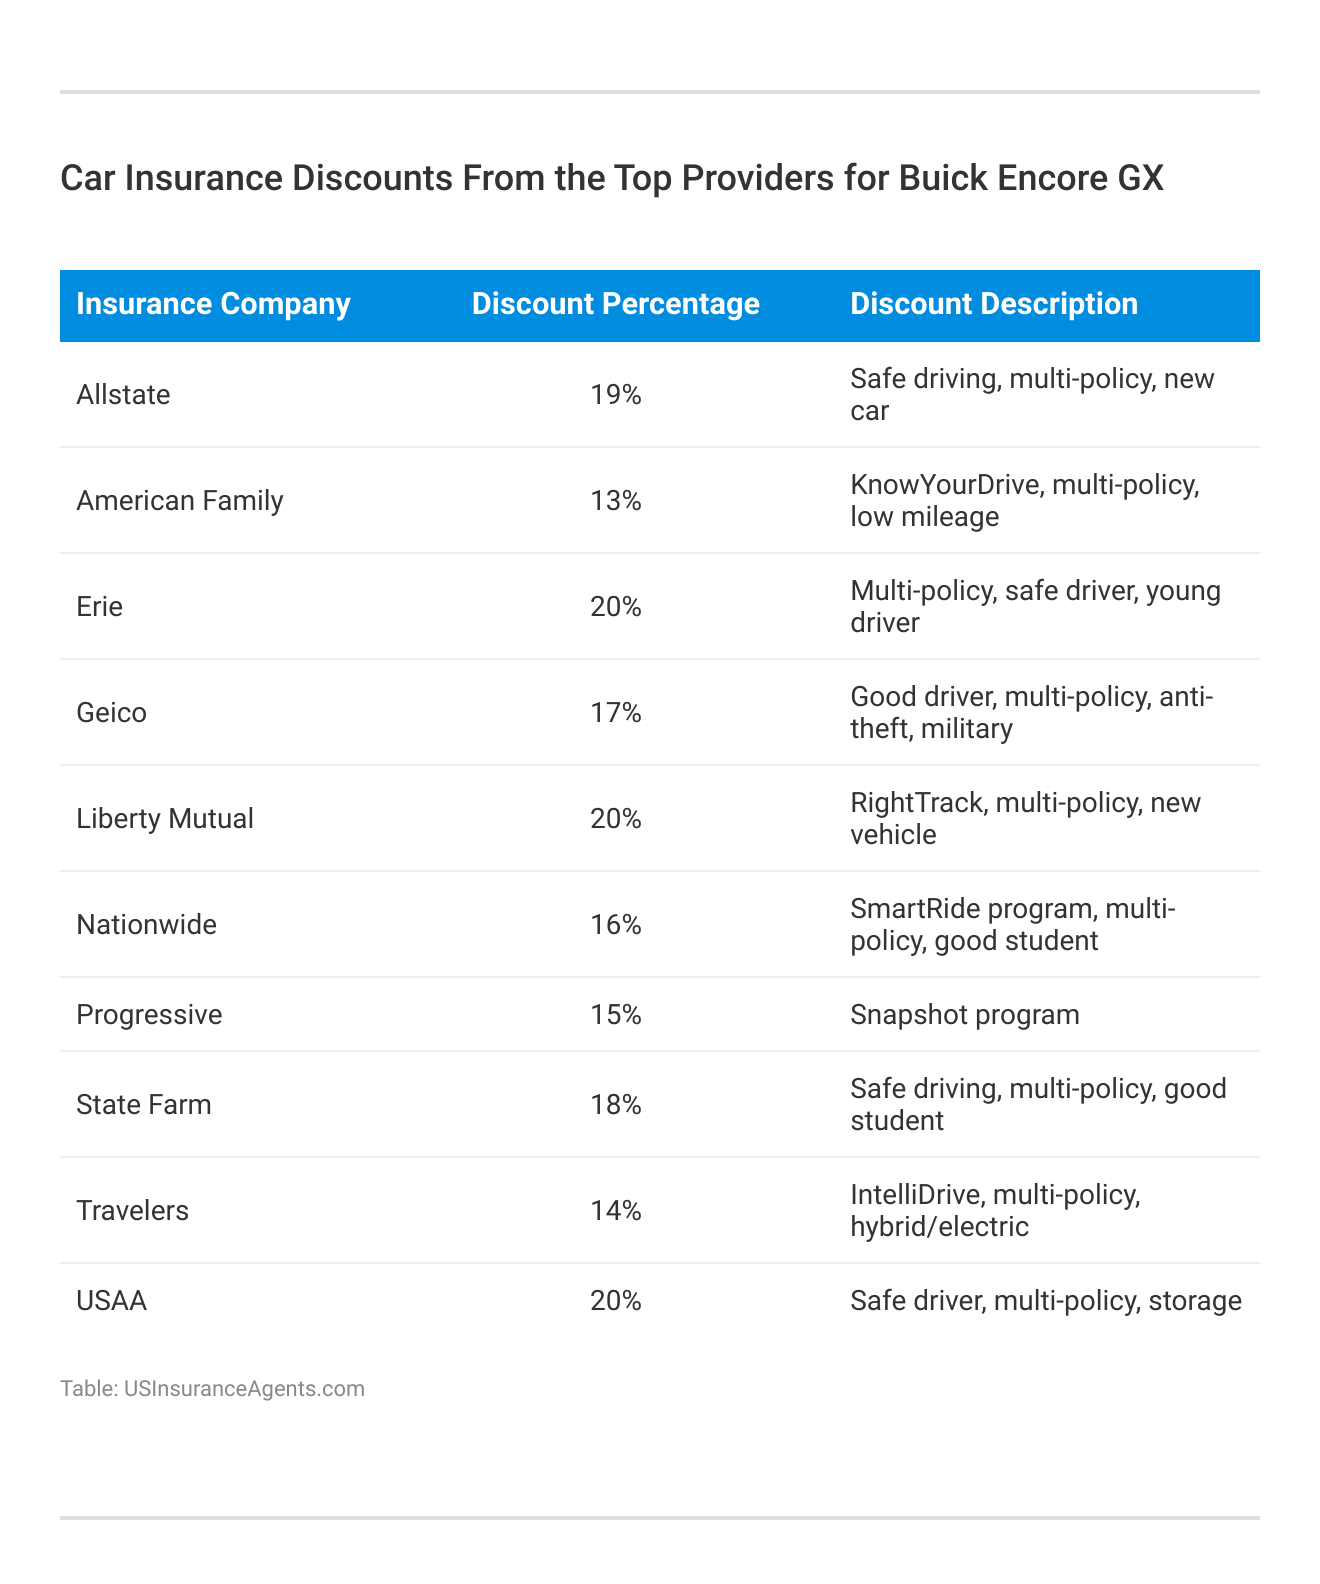 <h3>Car Insurance Discounts From the Top Providers for Buick Encore GX</h3>